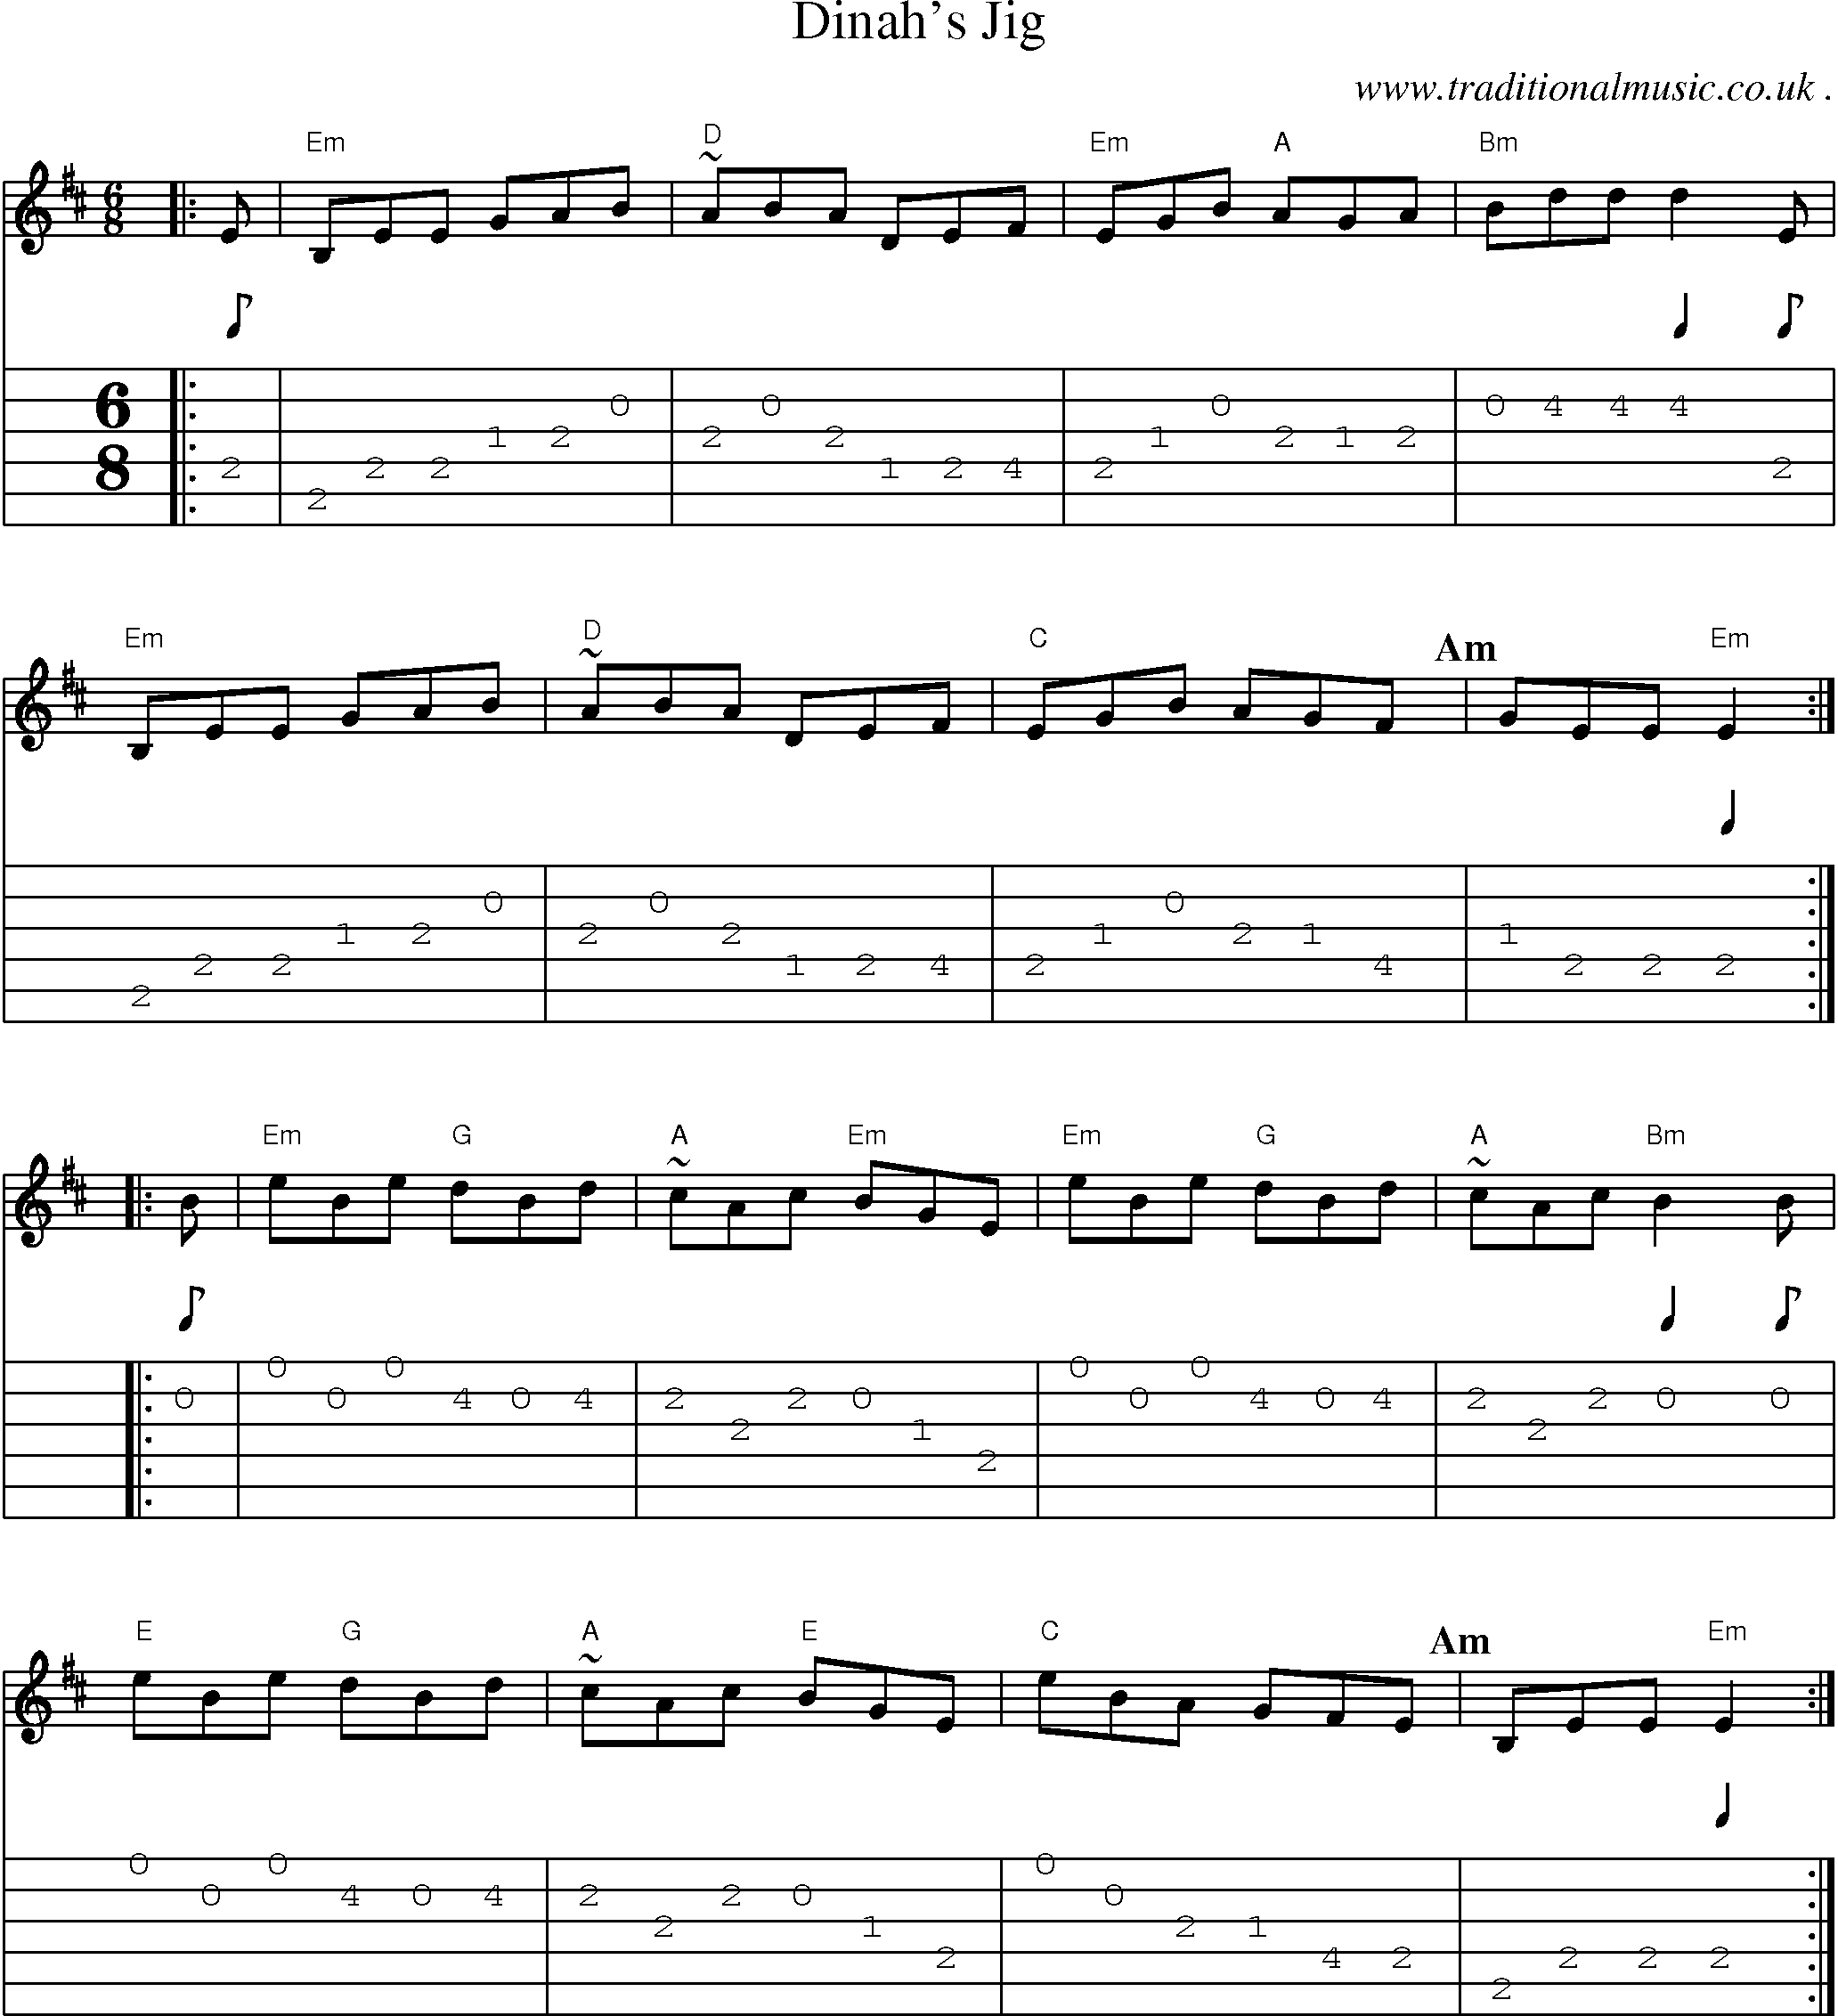 Music Score and Guitar Tabs for Dinahs Jig